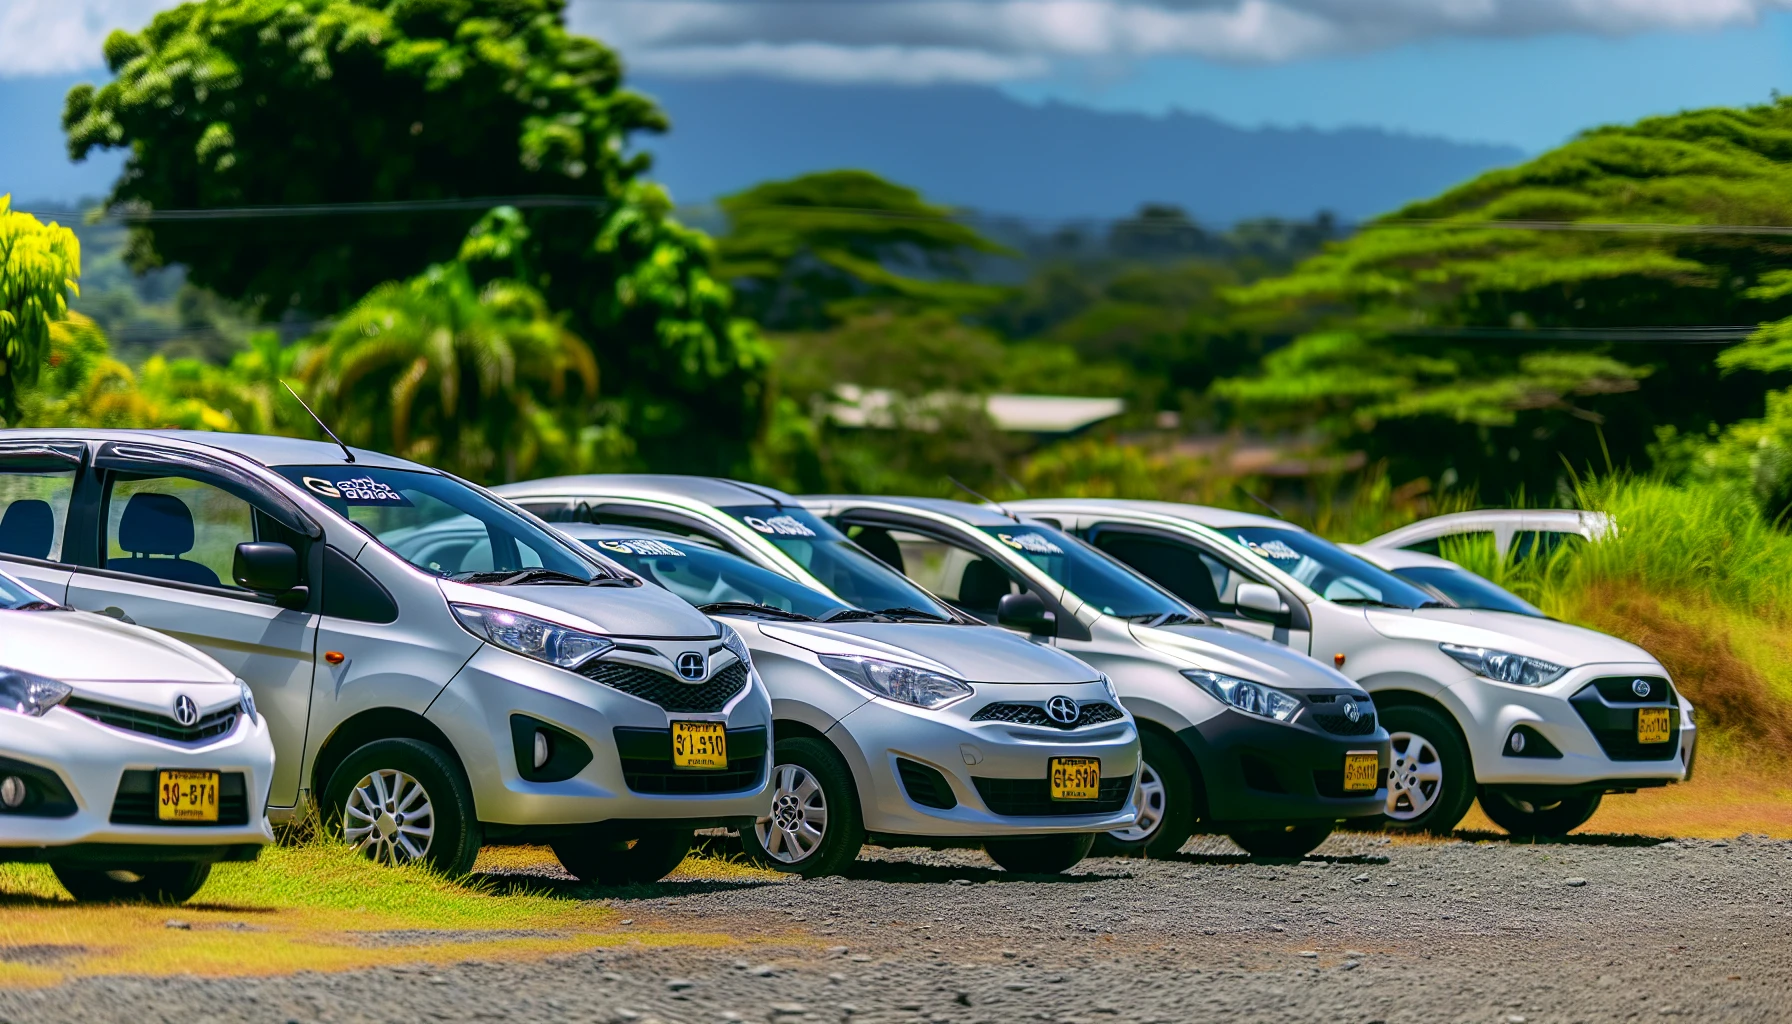 Choosing the right vehicle for your trip in Costa Rica